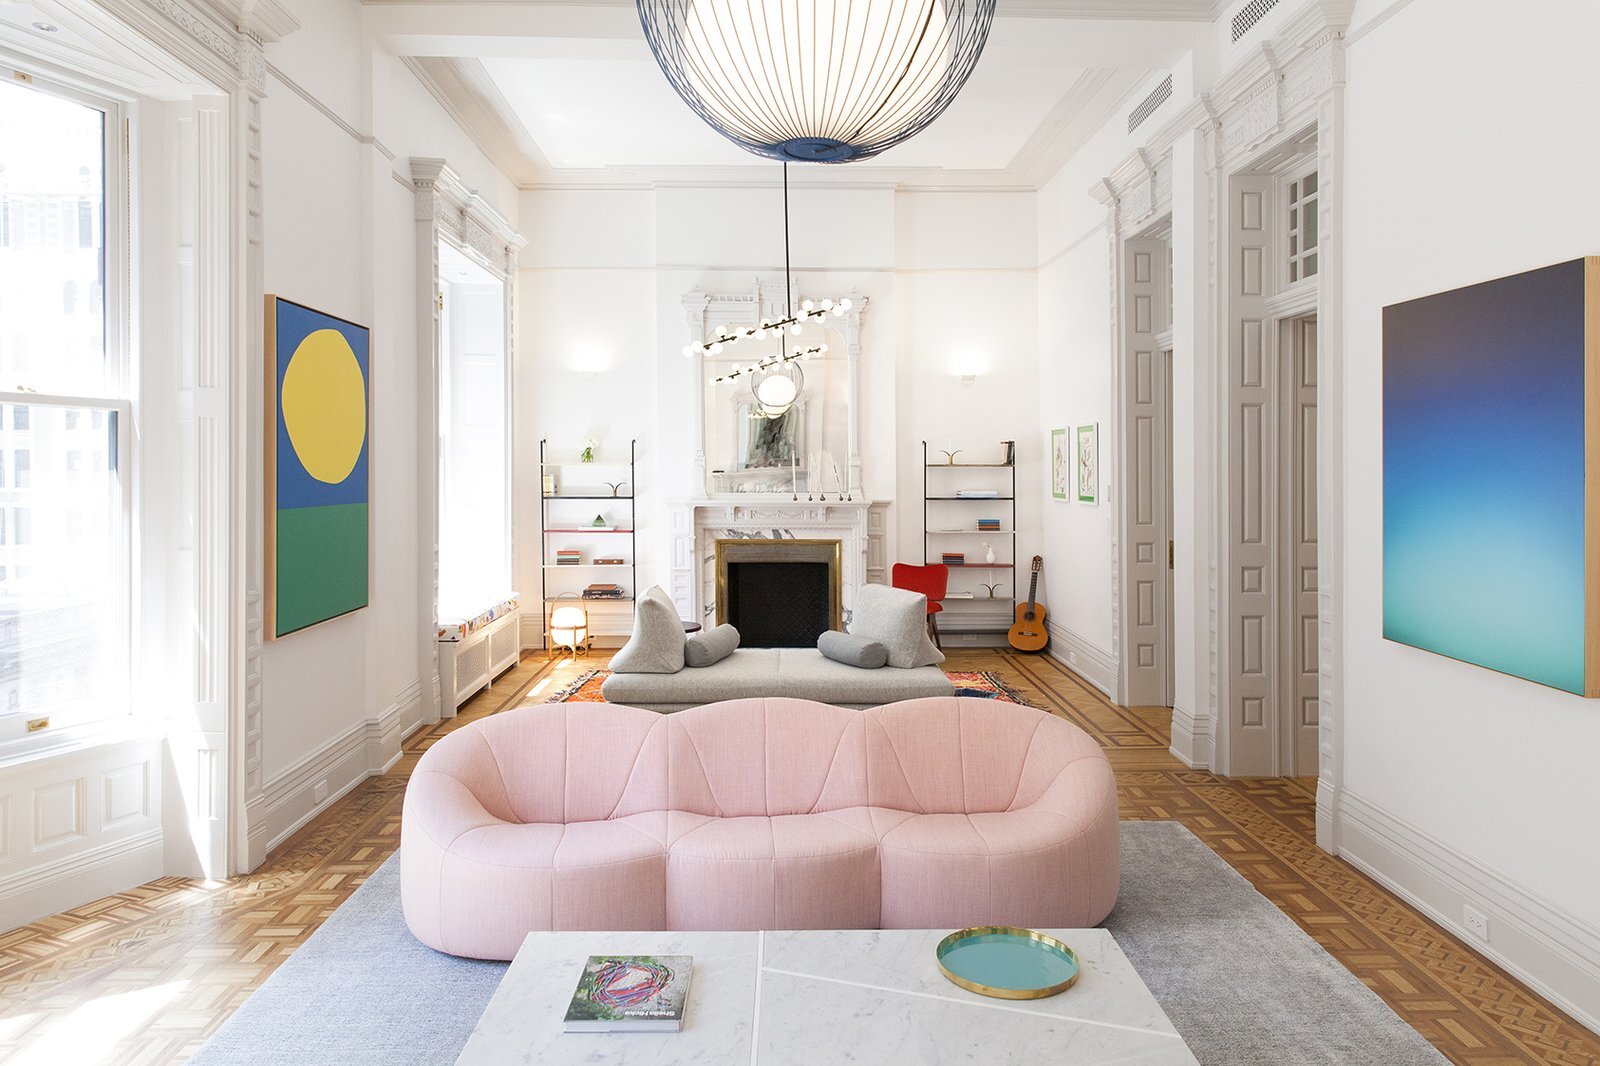 the-curvy-shape-of-this-pink-sofa-gives-it-a-fun-playful-quality.jpg